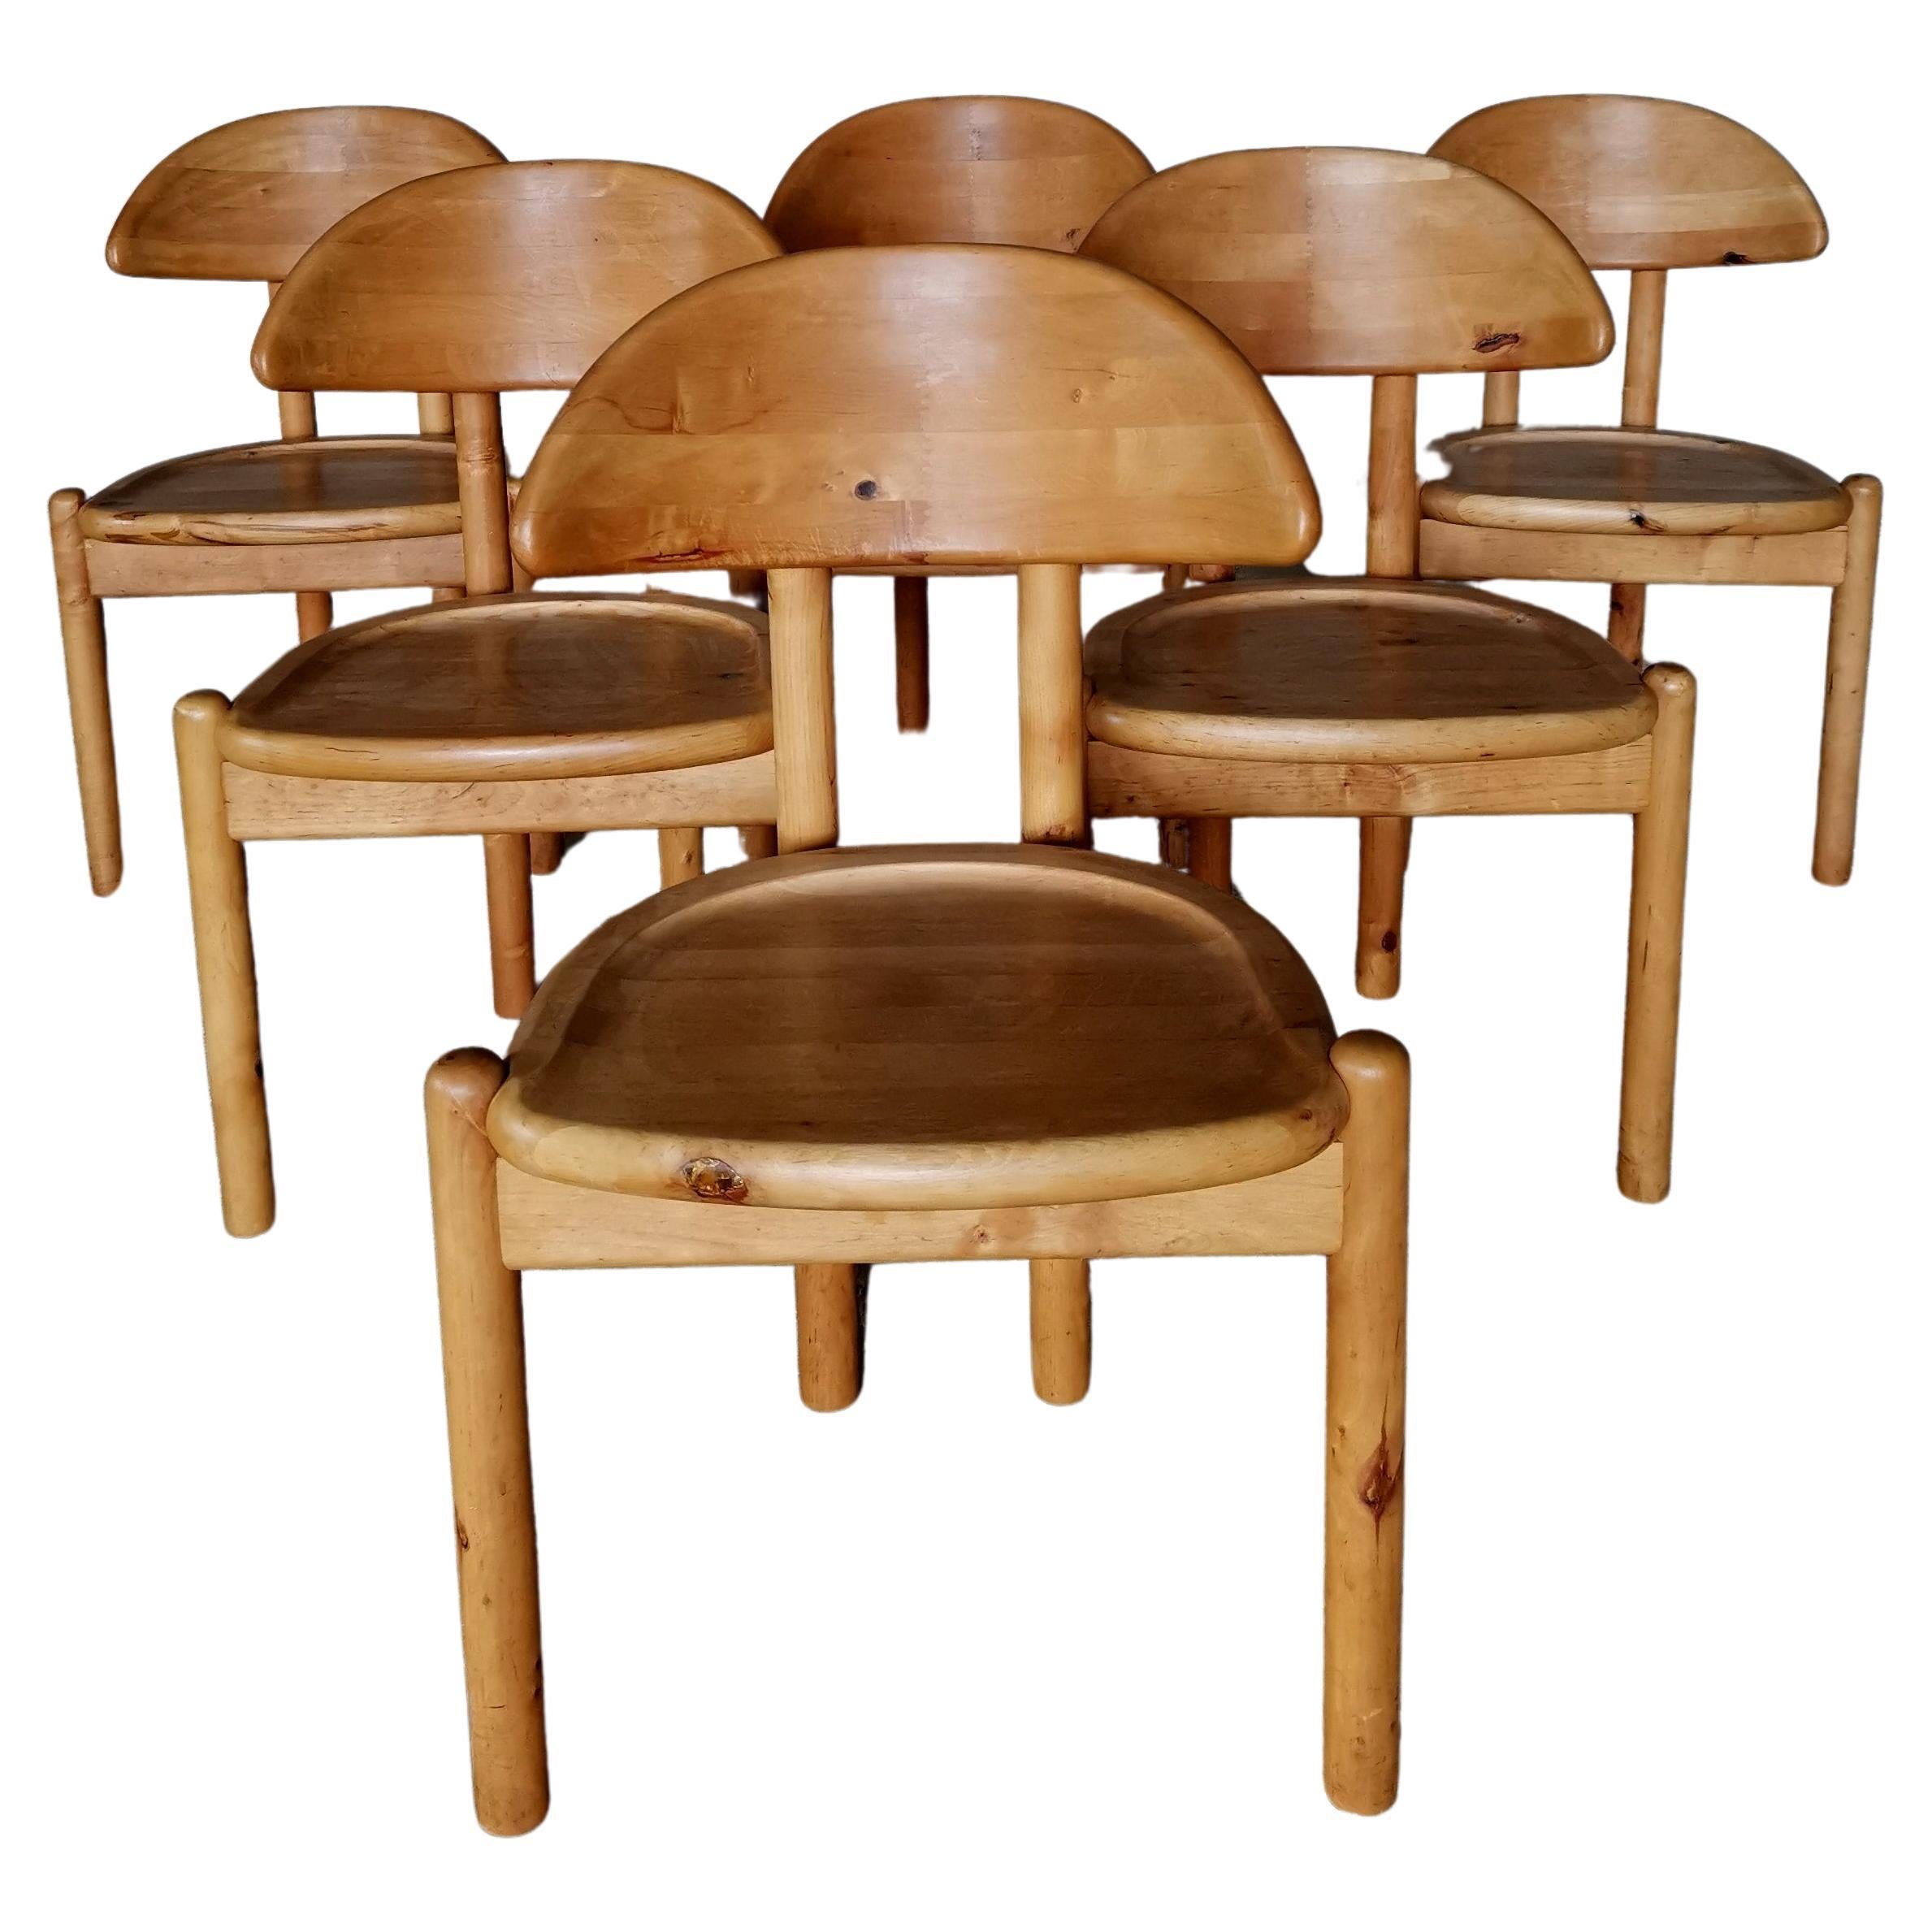 Six dining chairs in solid cherry, style of Rainer Daumiller. Denmark 1970s